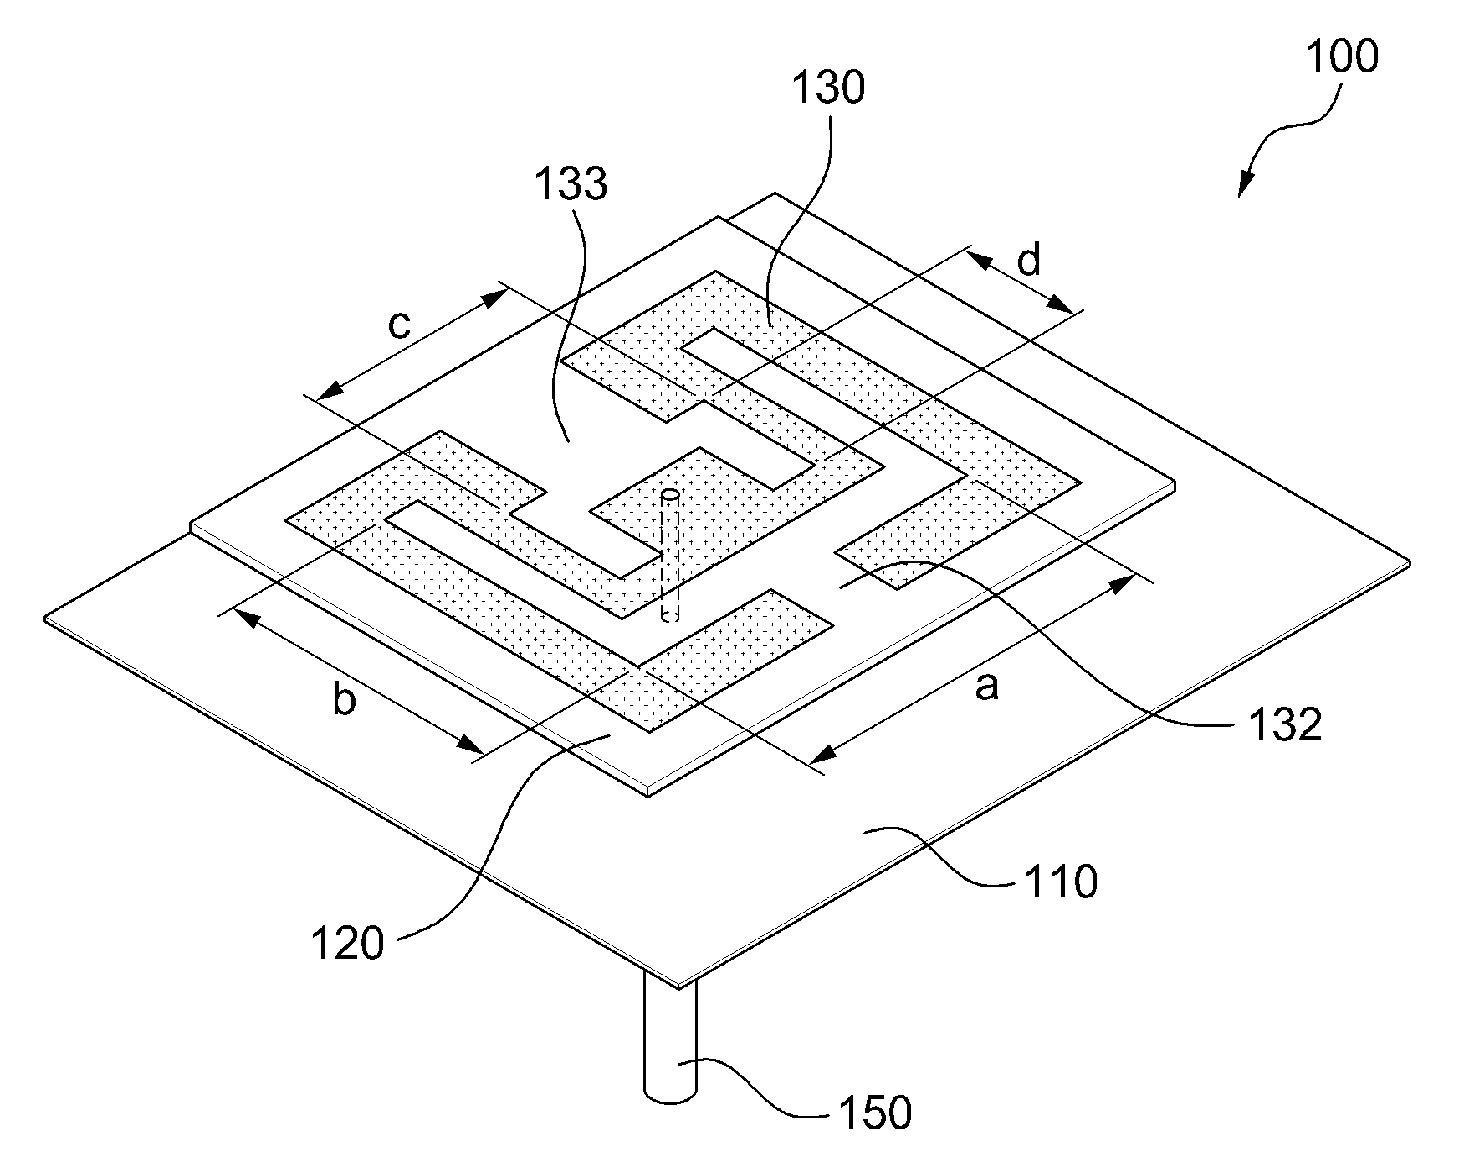 Microstrip antenna comprised of two slots